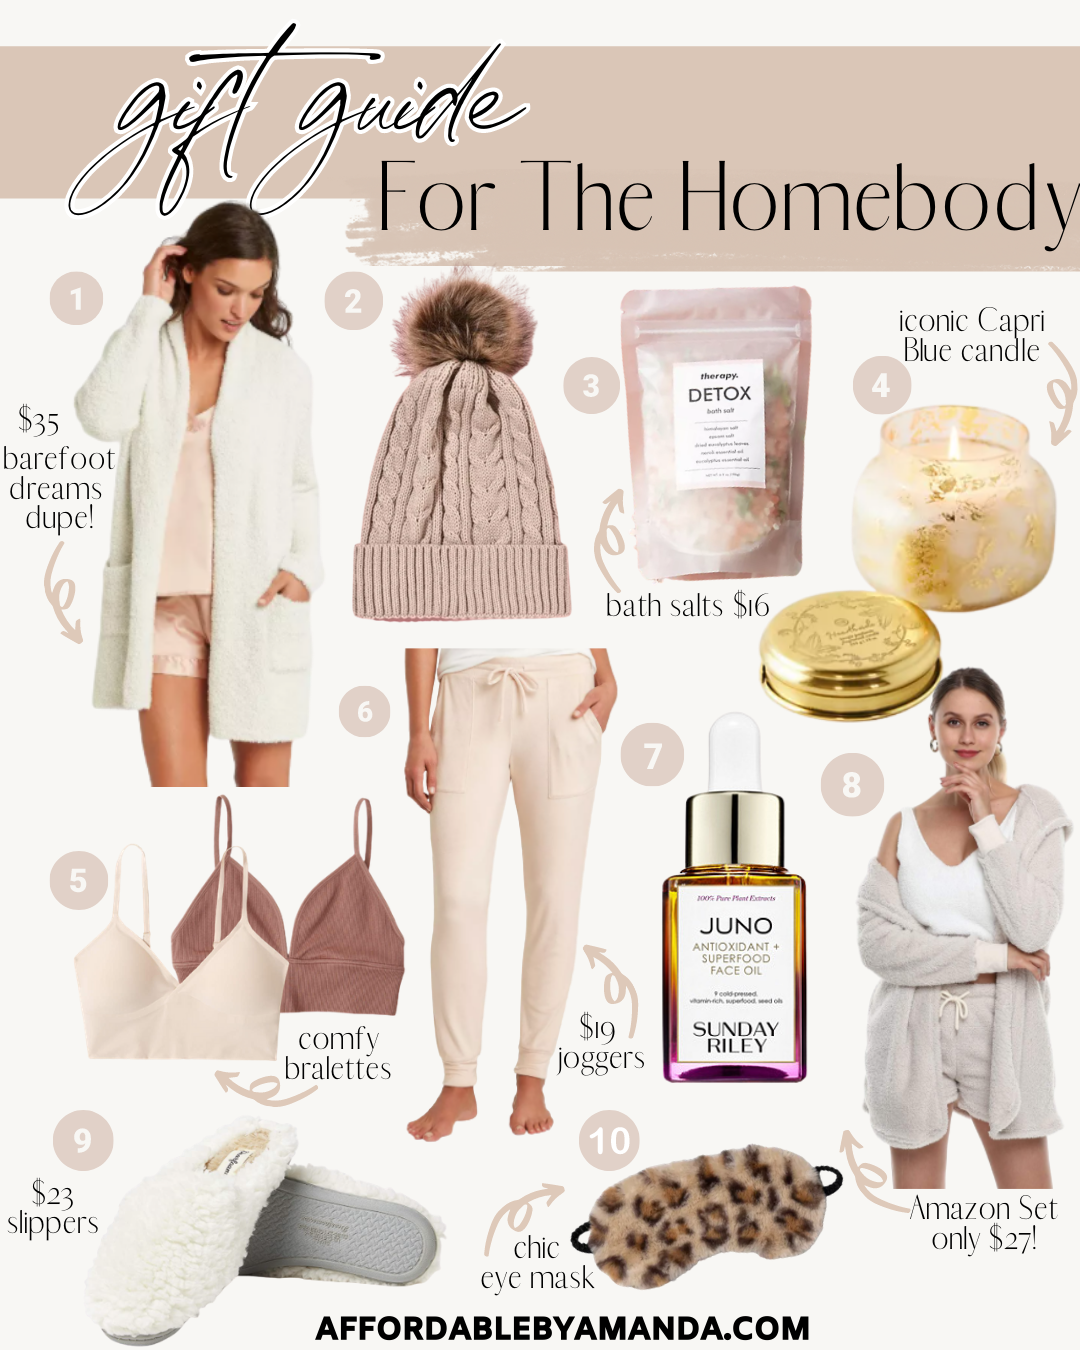 Holiday Gift Guide: 10 Gift Ideas for Homebodies 2020 - Affordable by Amanda